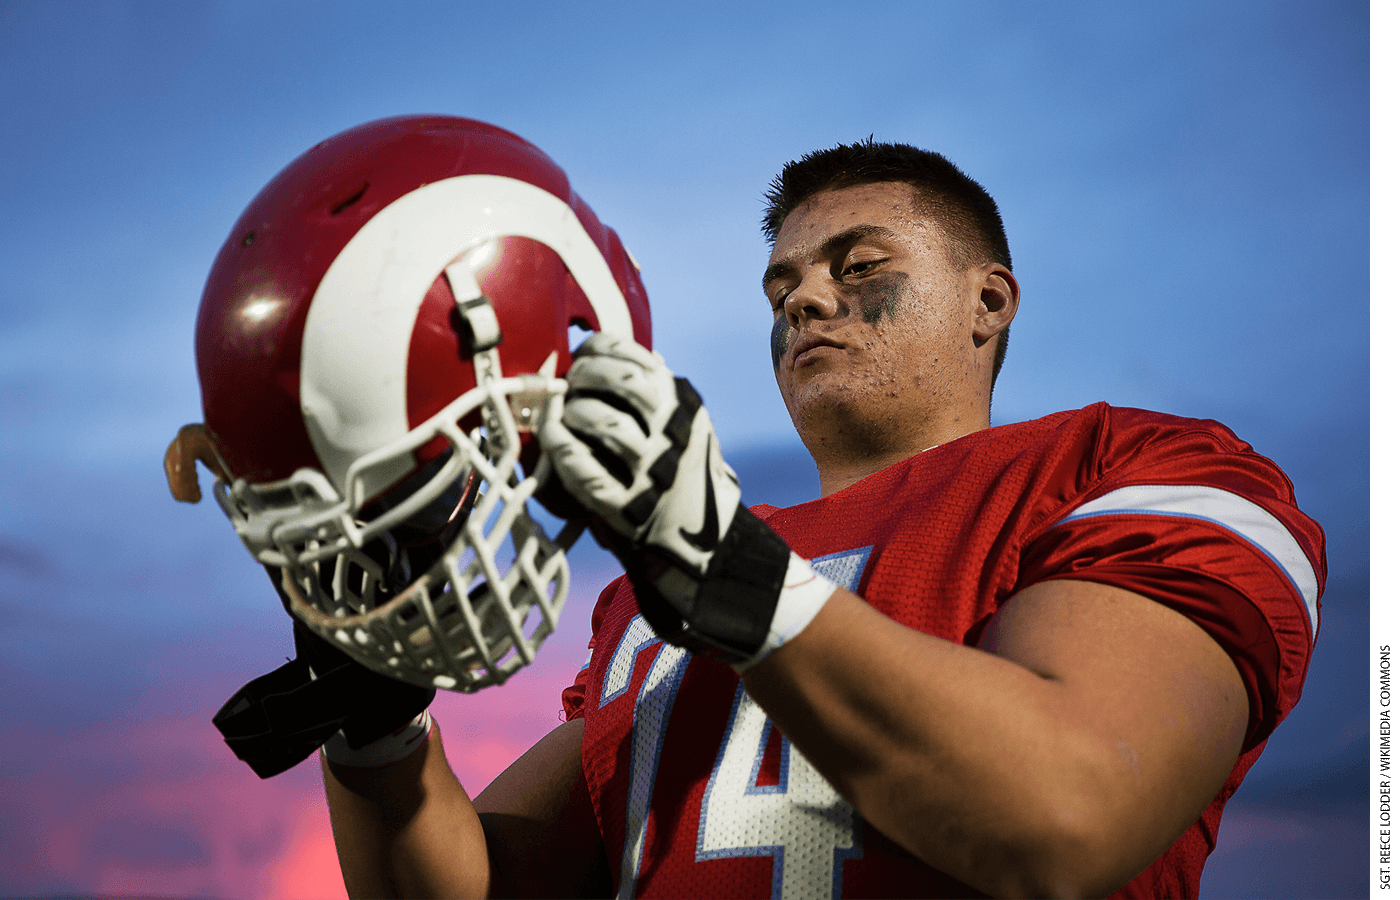 Shane Lemieux, a offensive tackle for the West Valley High School Rams varsity football team and 17-year-old native of Yakima, Wash., dons his helmet before a game against the Wenatchee High School Panthers at West Valley High School in Yakima, Wash., Oct. 31, 2014.